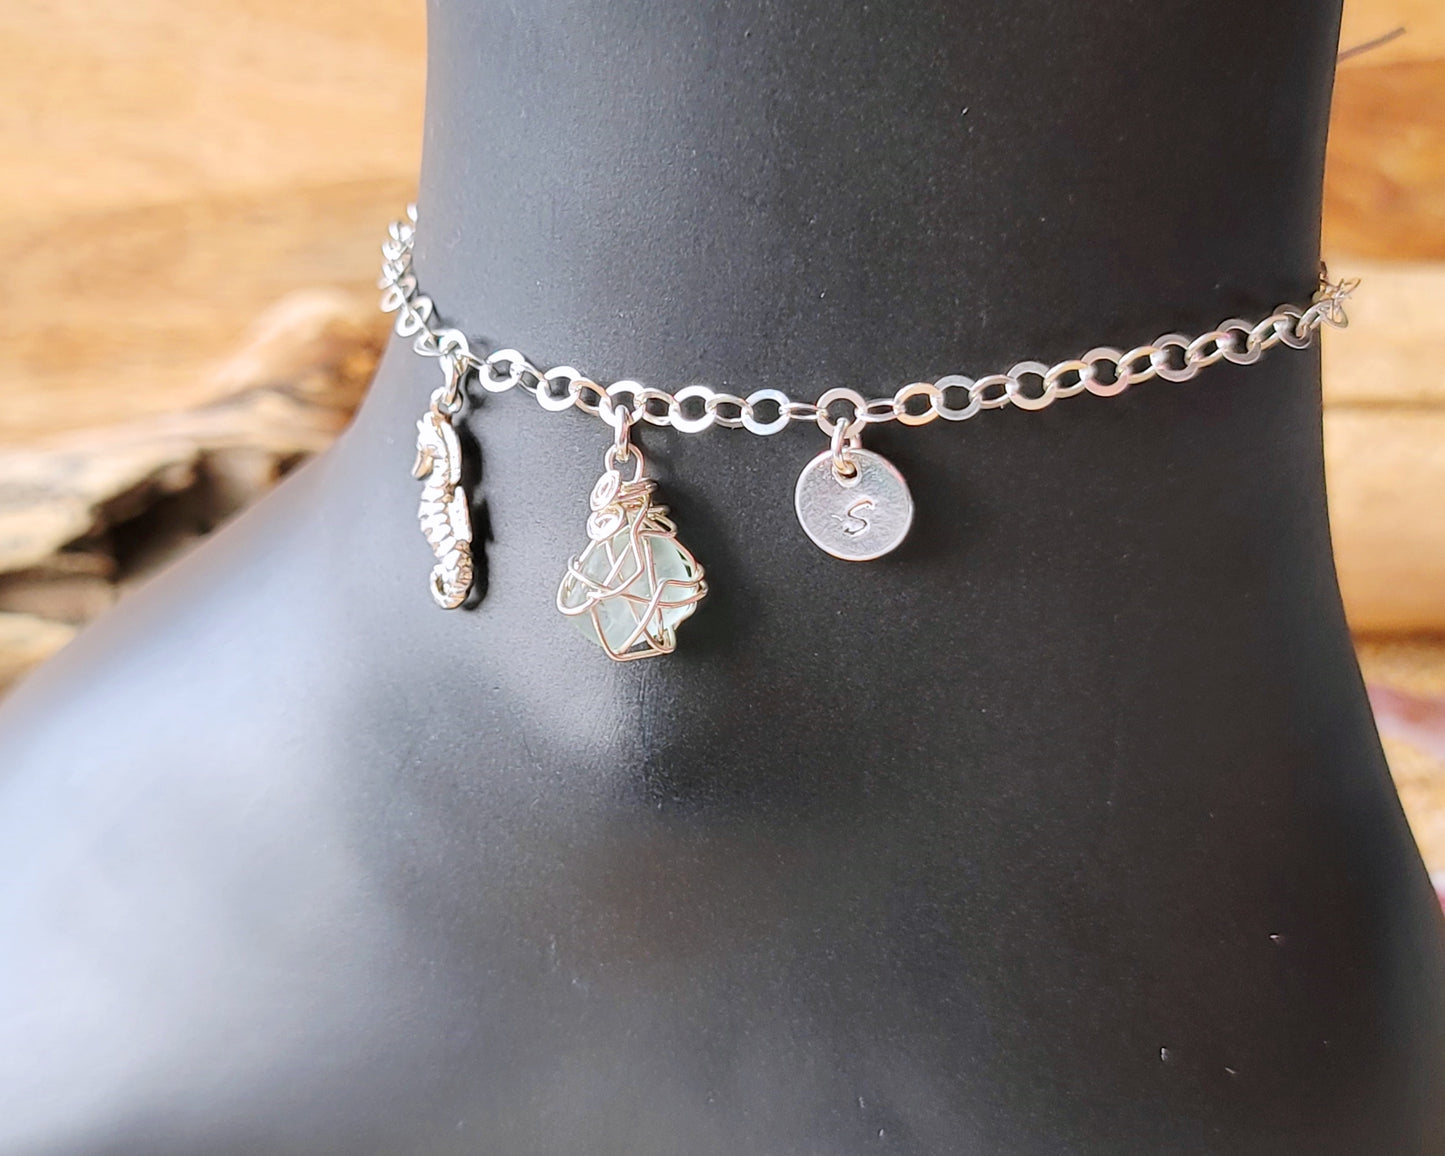 Deluxe Personalized Beach Glass, Sea Horse, Initial Ankle Bracelet, Anklet. One of a kind chain with Dangly Pendants handmade with solid 925 Sterling Silver and pale Aqua Blue Lake Ontario Beach Glass